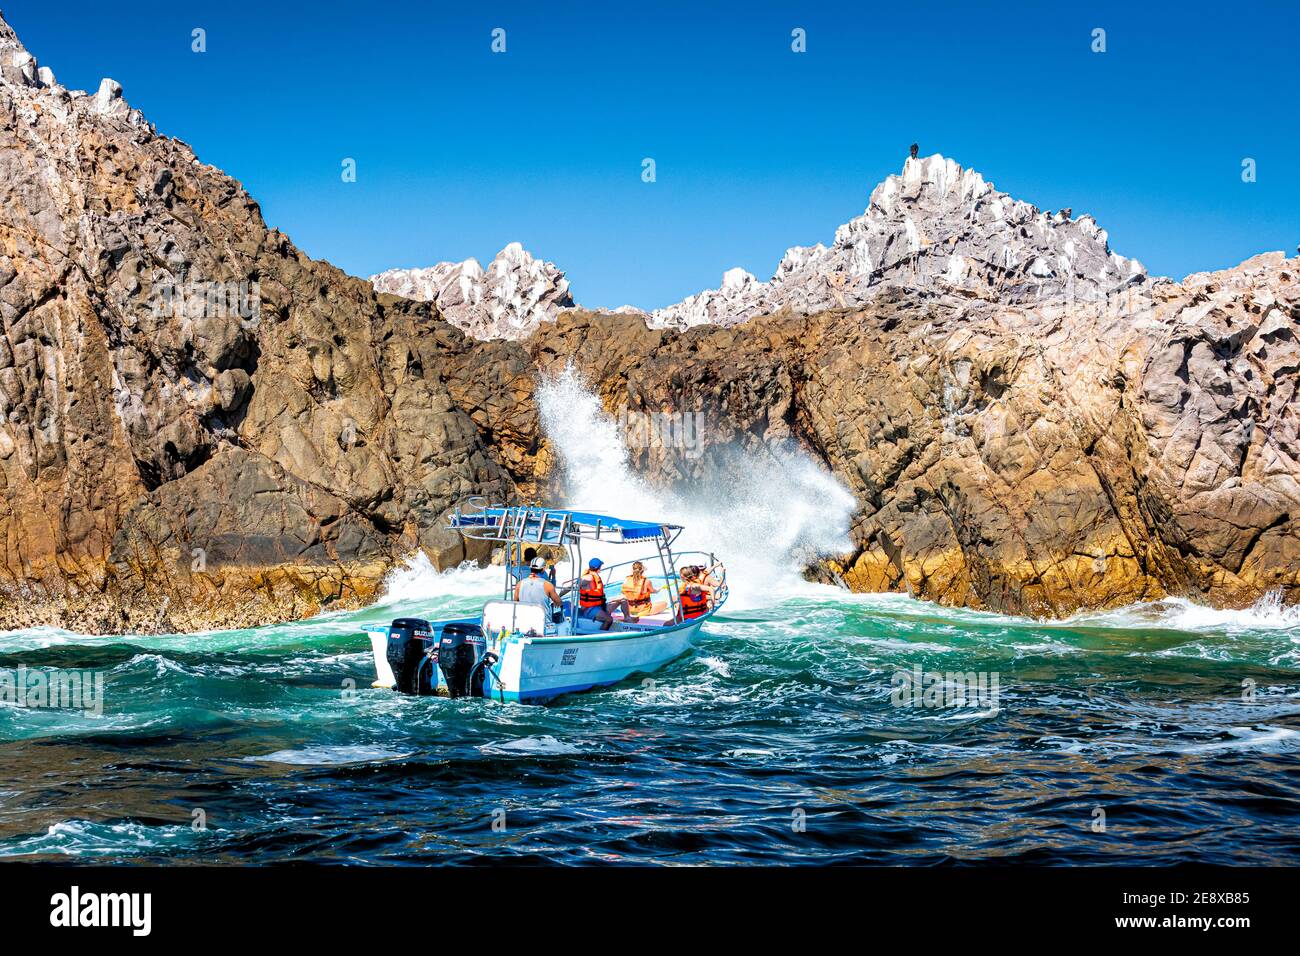 A tour boat circles the Marietas Islands off the Pacific Coast of Nayarit, Mexico. Stock Photo